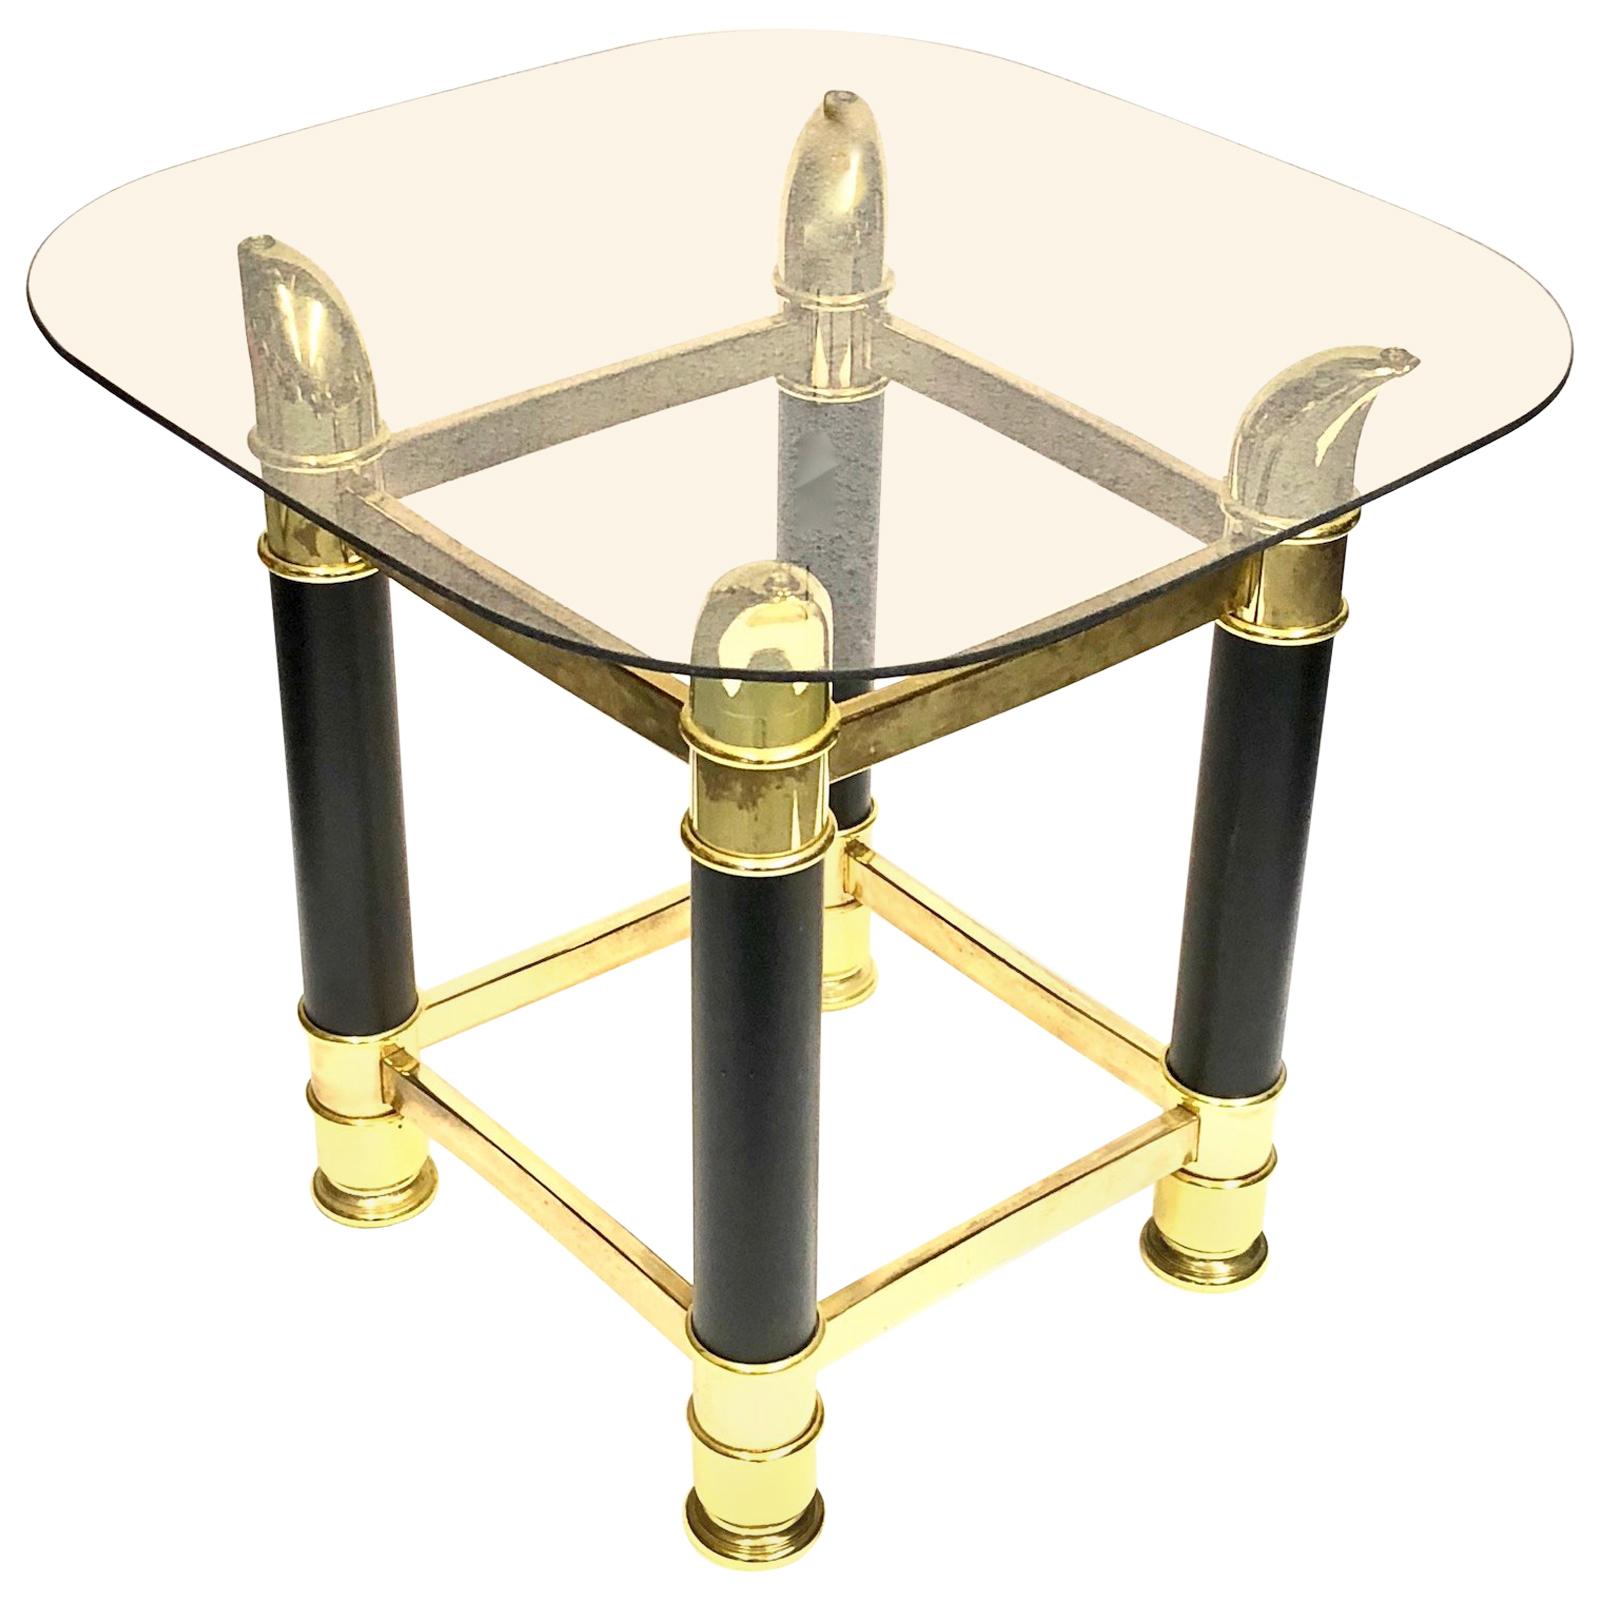 Italian Midcentury Brass and Glass Side Table, 1970s For Sale